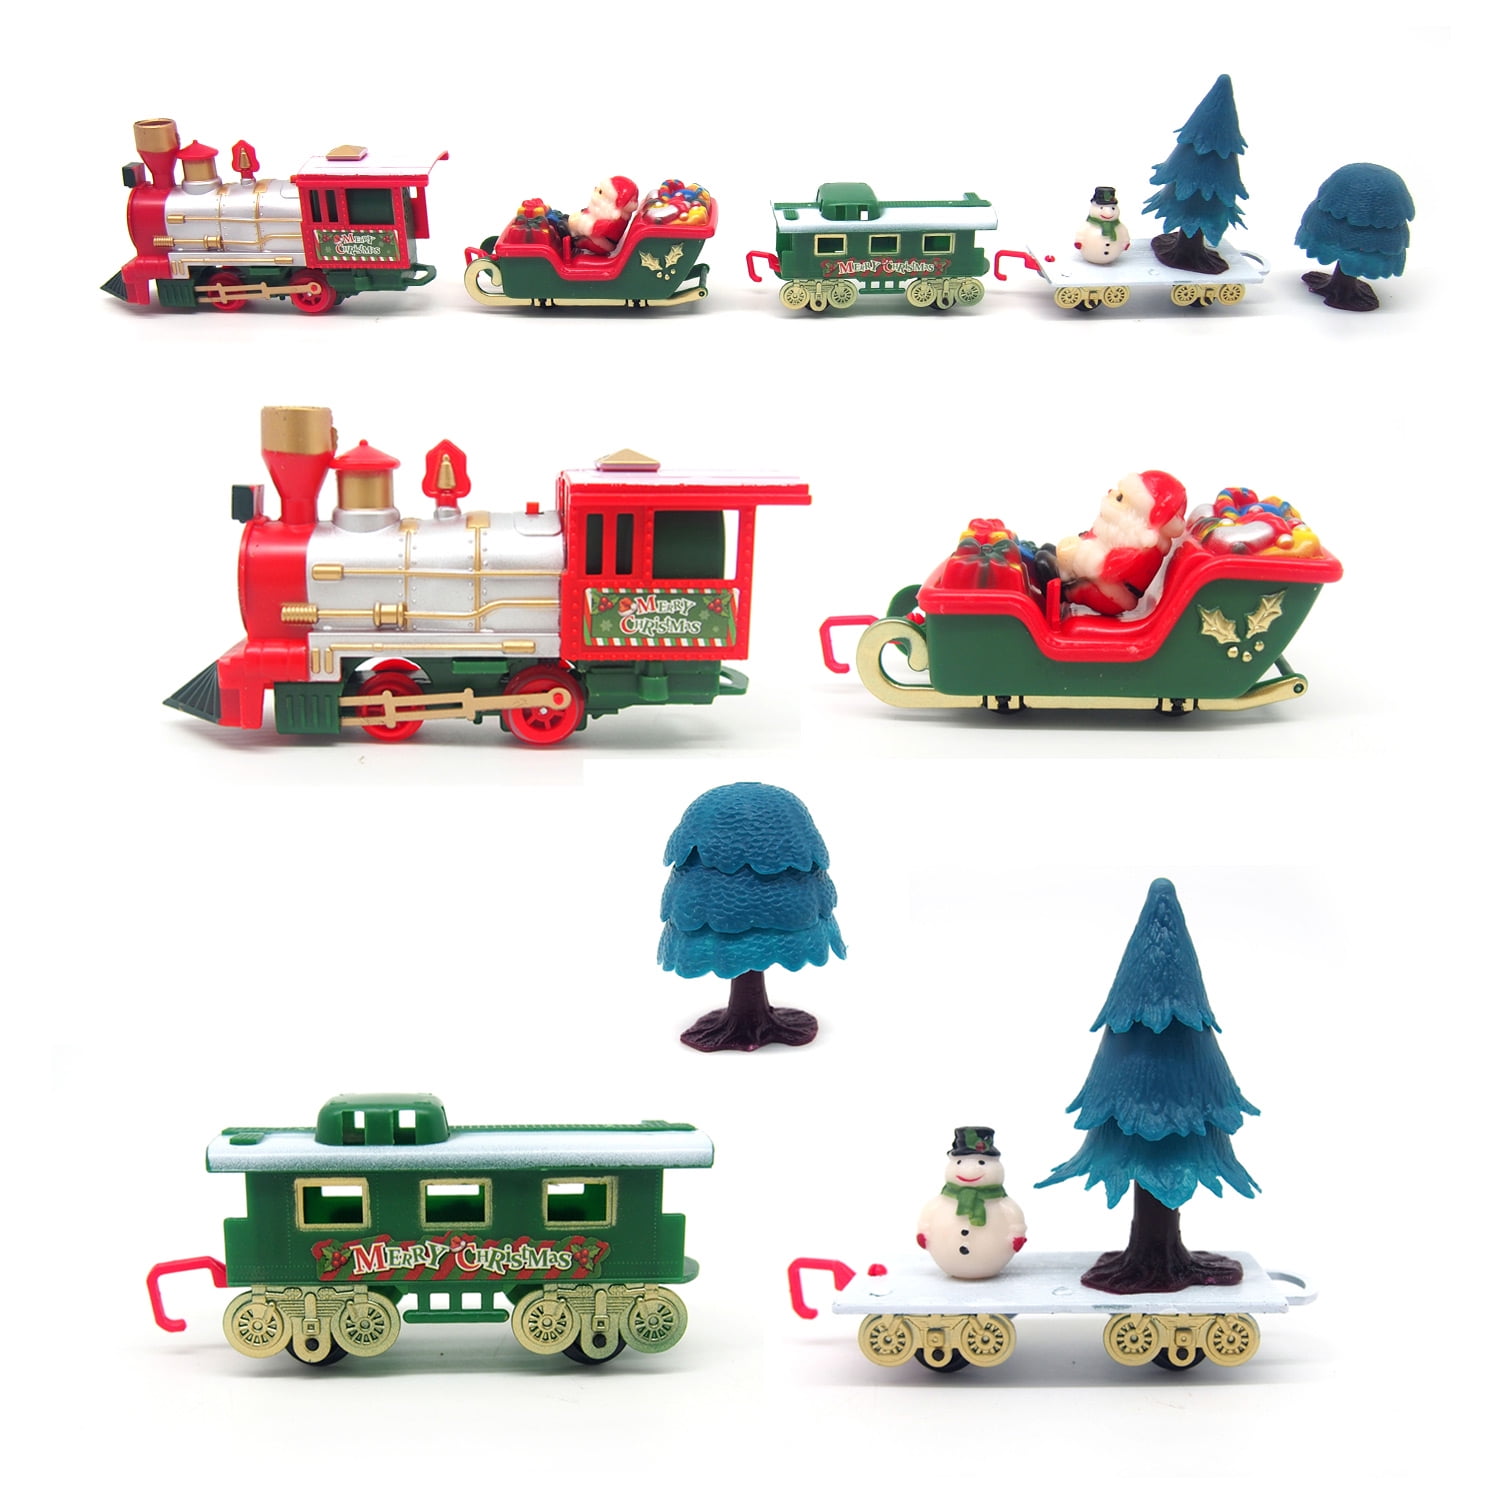 You can do 10 different forms of track! Christmas Train Santa Claus